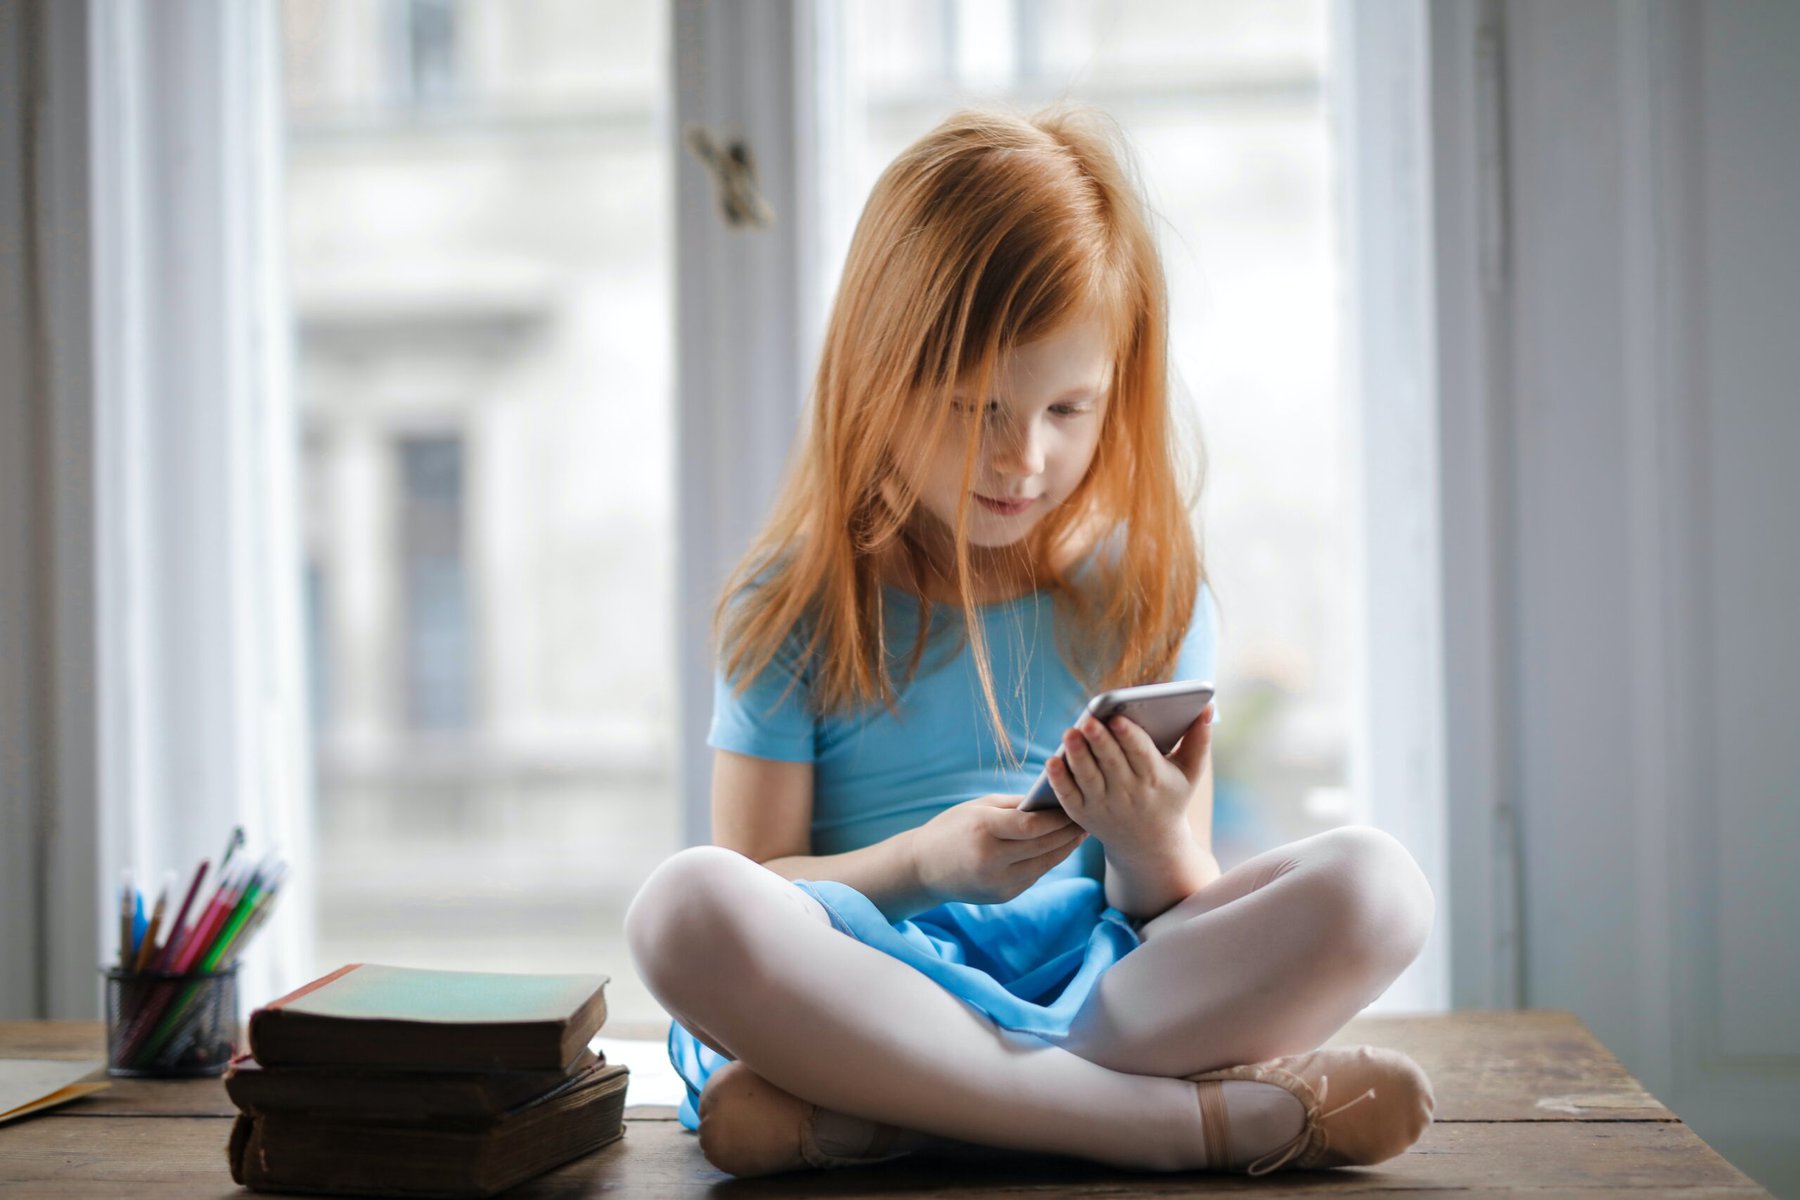 Smart Ways To Teach Your Kids To Use Social Media